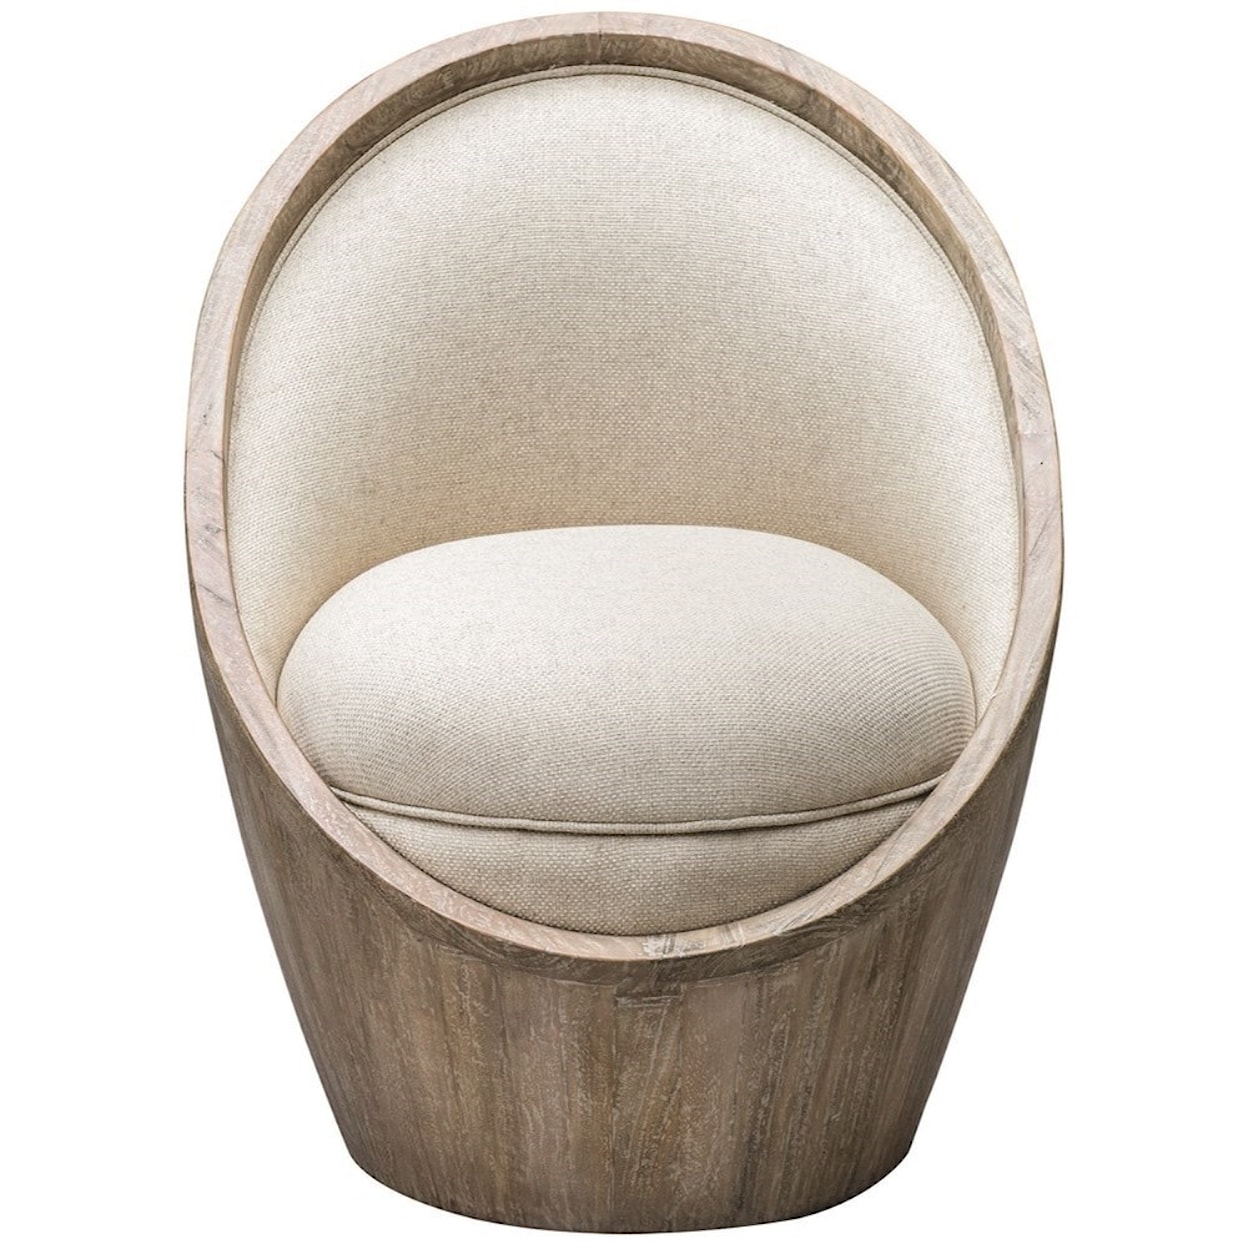 Uttermost Accent Furniture - Accent Chairs Noemi Morden Accent Chair